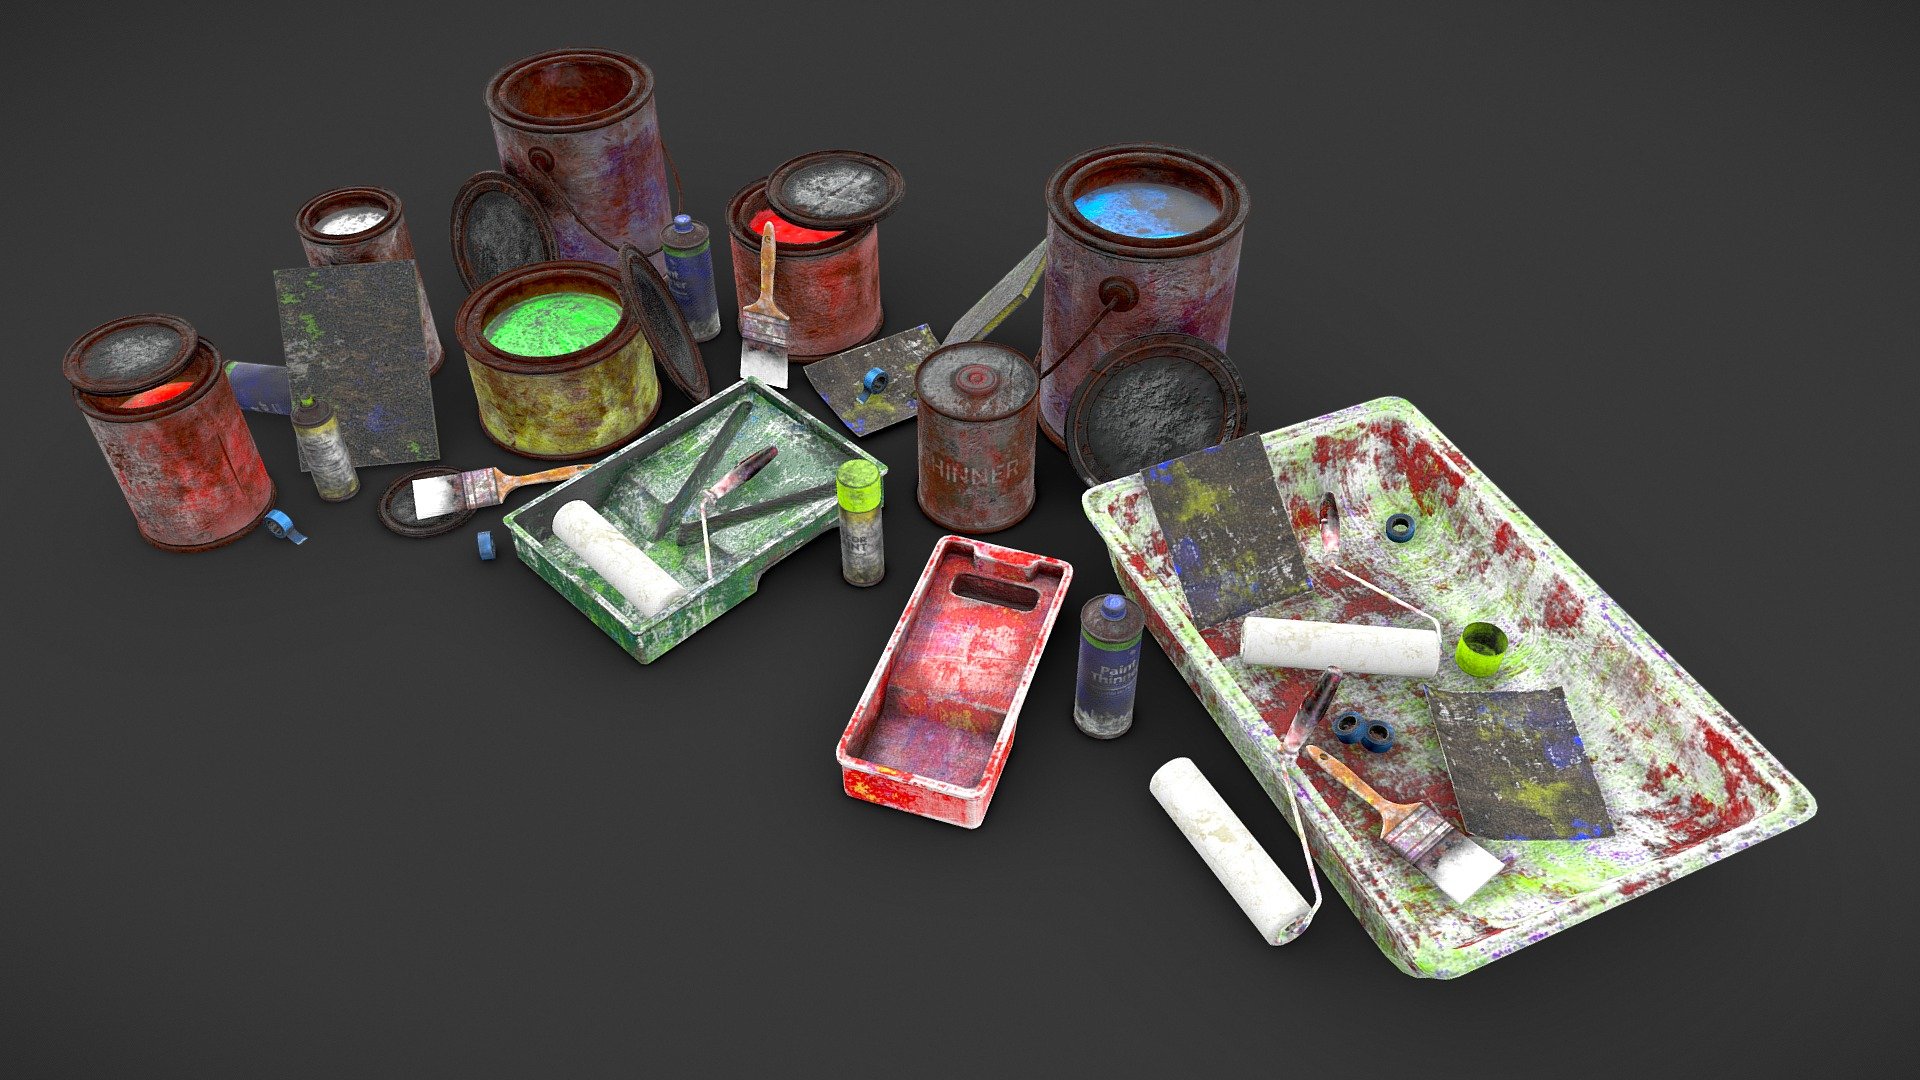 New set with a good amount of objects related to painting, is part of a workbench set project and as a texturing exercise.

Meet my new project Marco Virtual:  https://sketchfab.com/marco_virtual

Modeling High/Low/UV: 3ds Max

Baking: Marmoset Toolbag 3 / Substance Painter

Textured: Substance Painter

Artstation: https://www.artstation.com/artwork/N50oLN - Paint Set - Buy Royalty Free 3D model by José Baltazar (@josebalta) 3d model